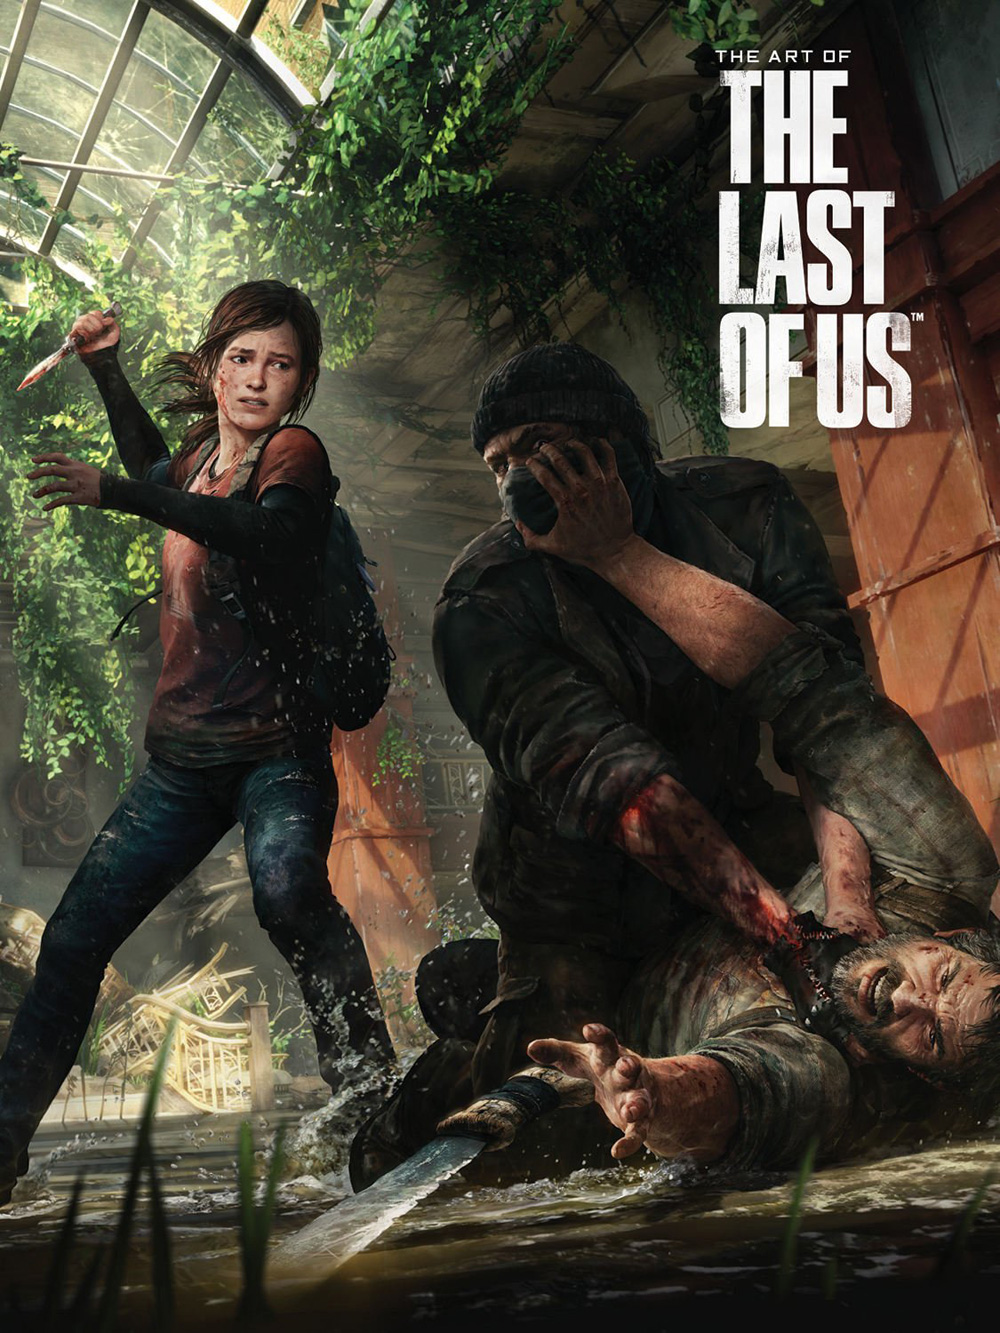 the last of us part 2 artwork